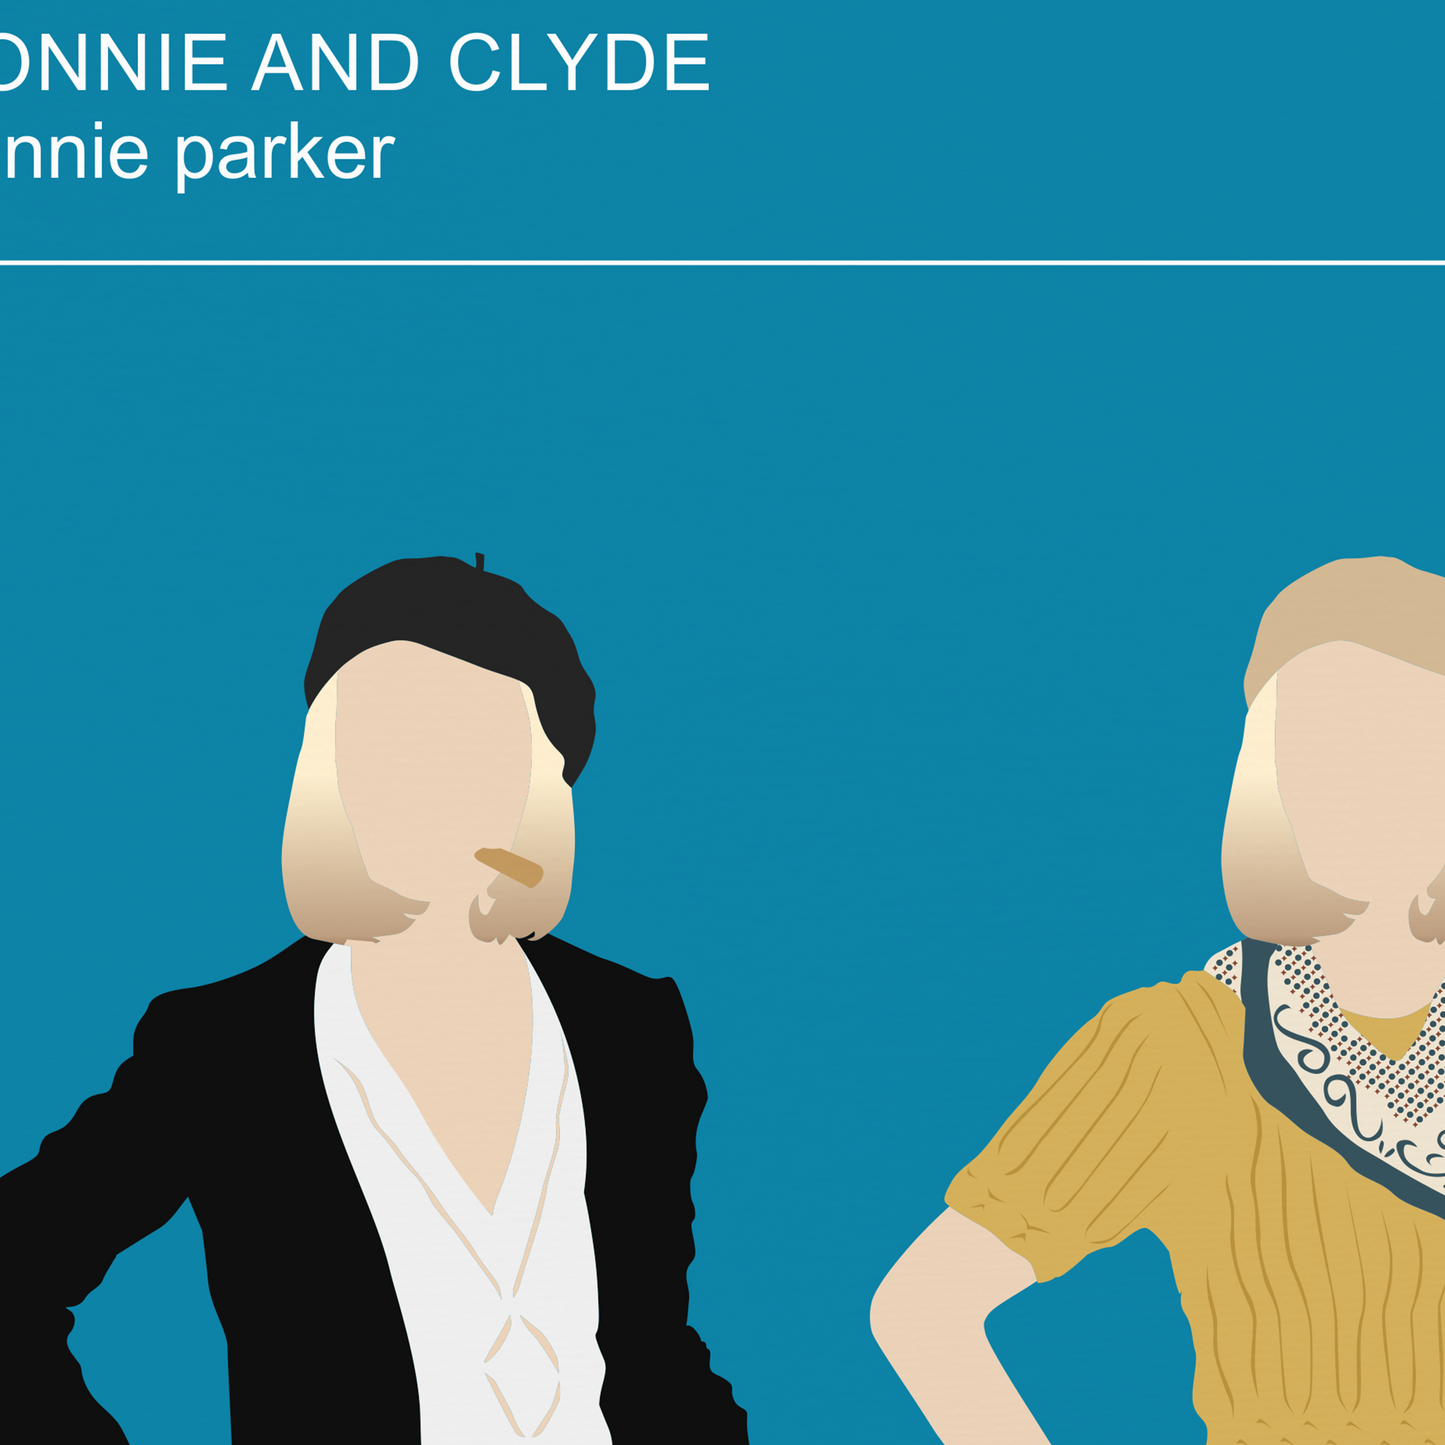 New item! Bonnie and Clyde poster, Faye Dunaway wardrobe print